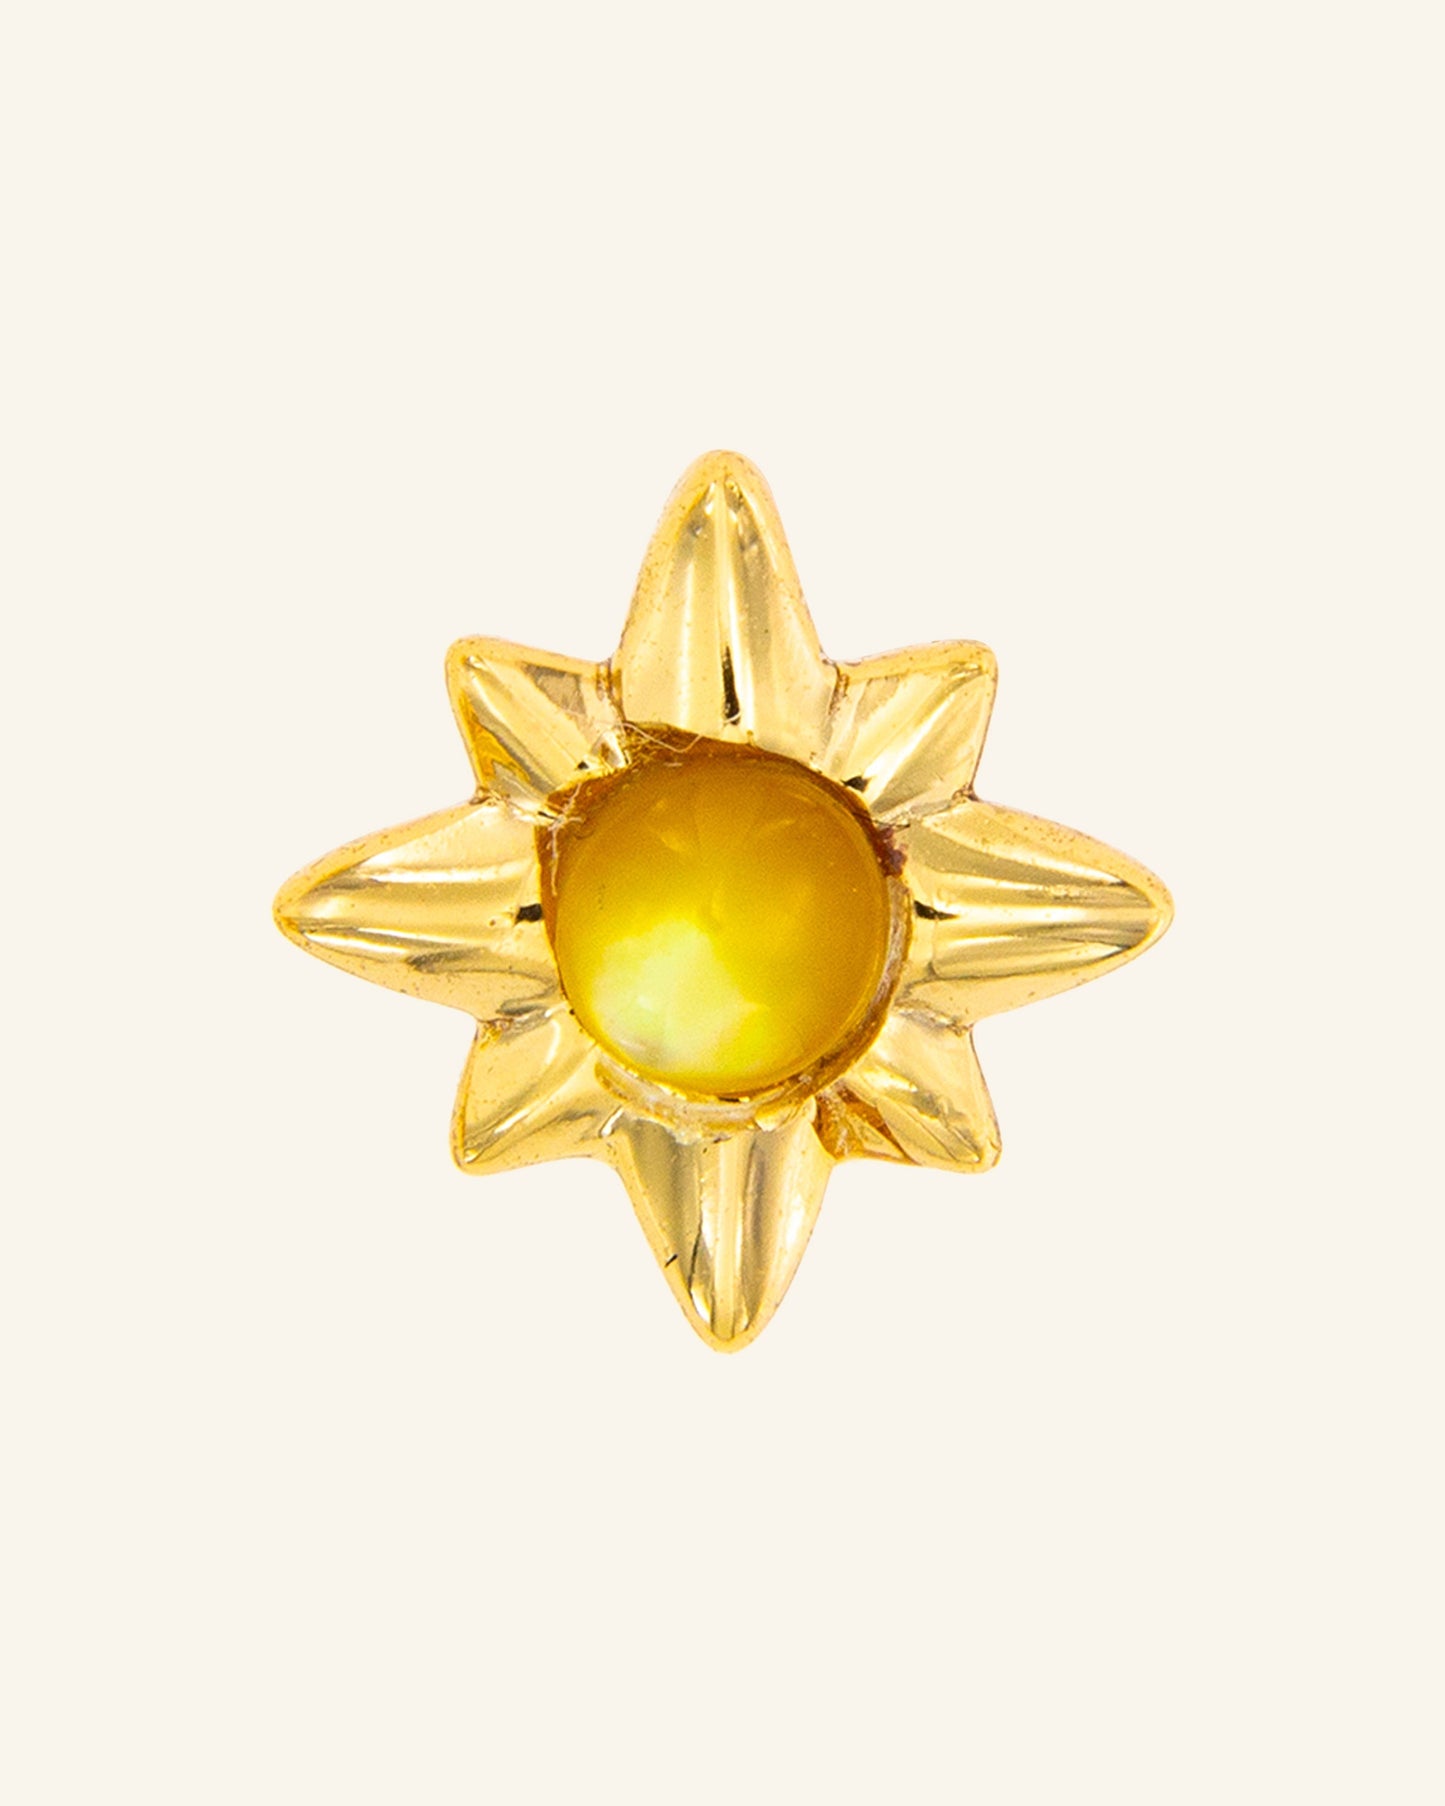 Estrella Minor pendant with yellow mother of pearl